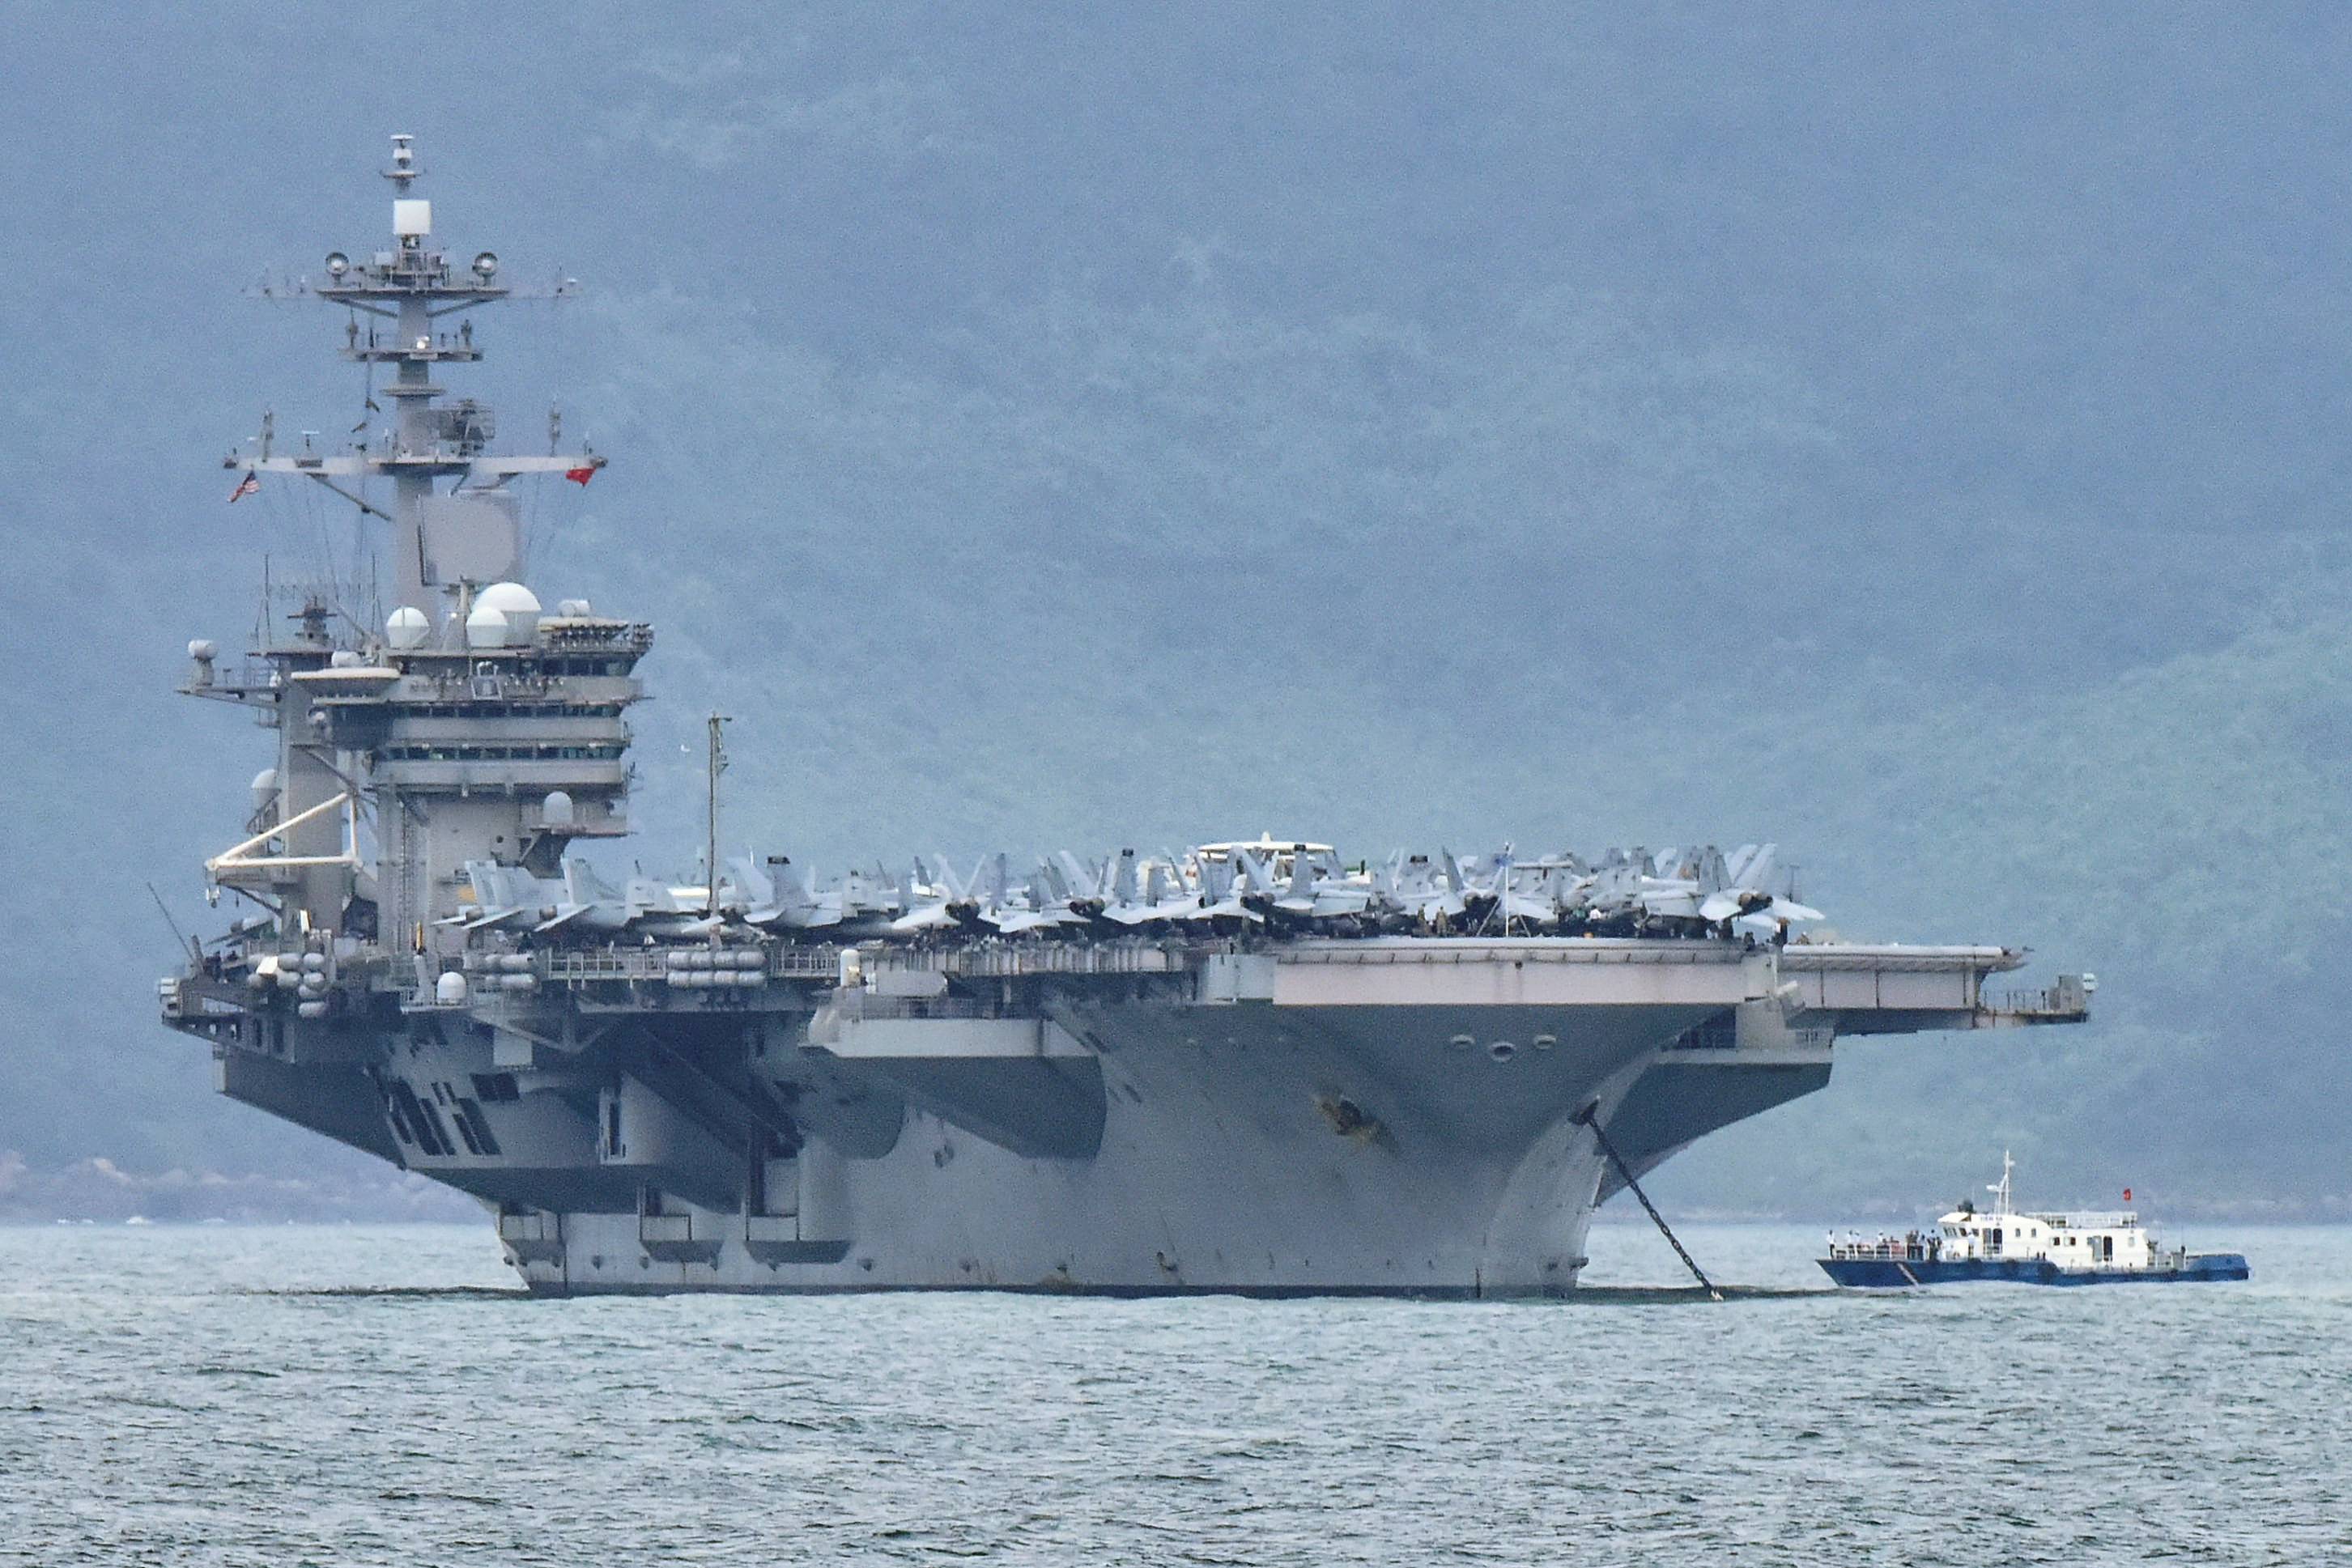 The USS Theodore Roosevelt enters the port in Da Nang, Vietnam, March 5. The United States has said it is 'seriously concerned' about China's reported sinking of a Vietnamese fishing boat. | REUTERS